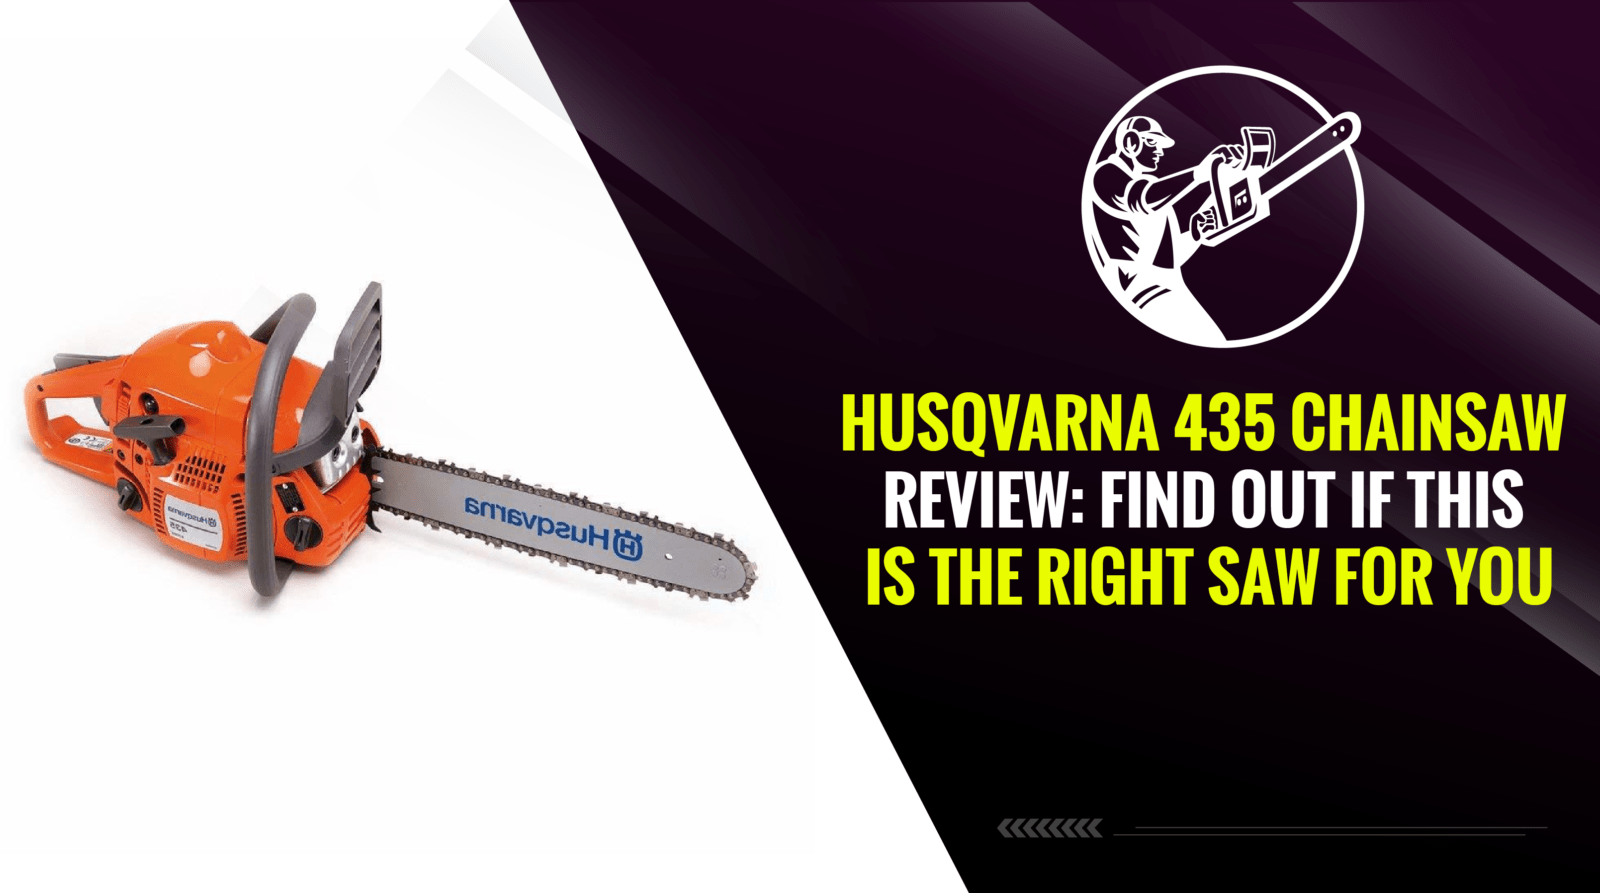 Husqvarna 435 Chainsaw Review Find Out If This Is the Right Saw for You